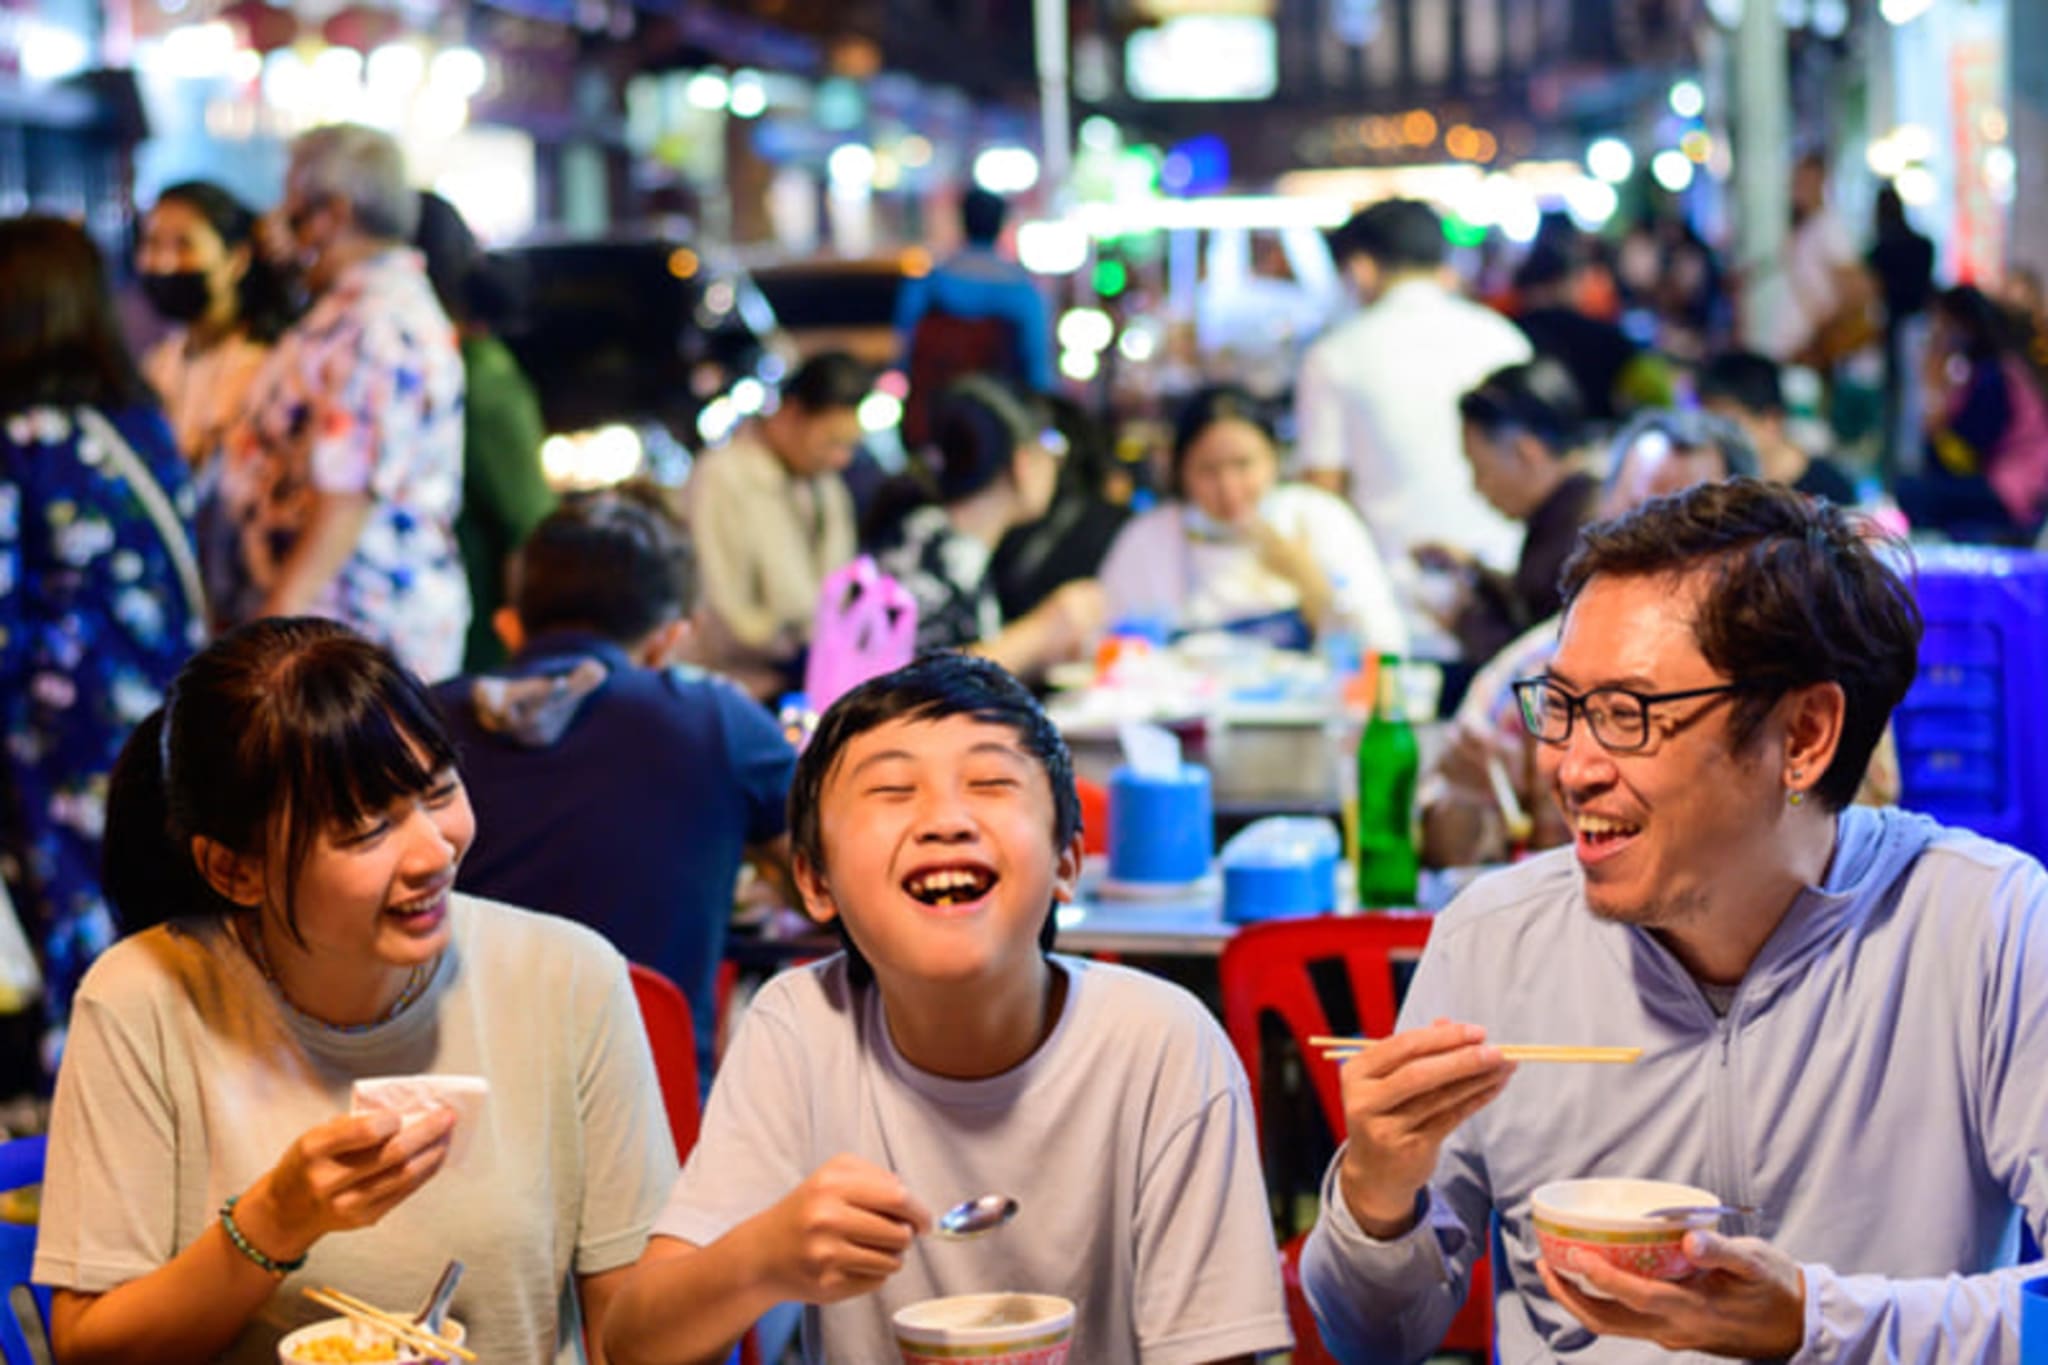 Family eating street food together in Bangkok's Chinatown.